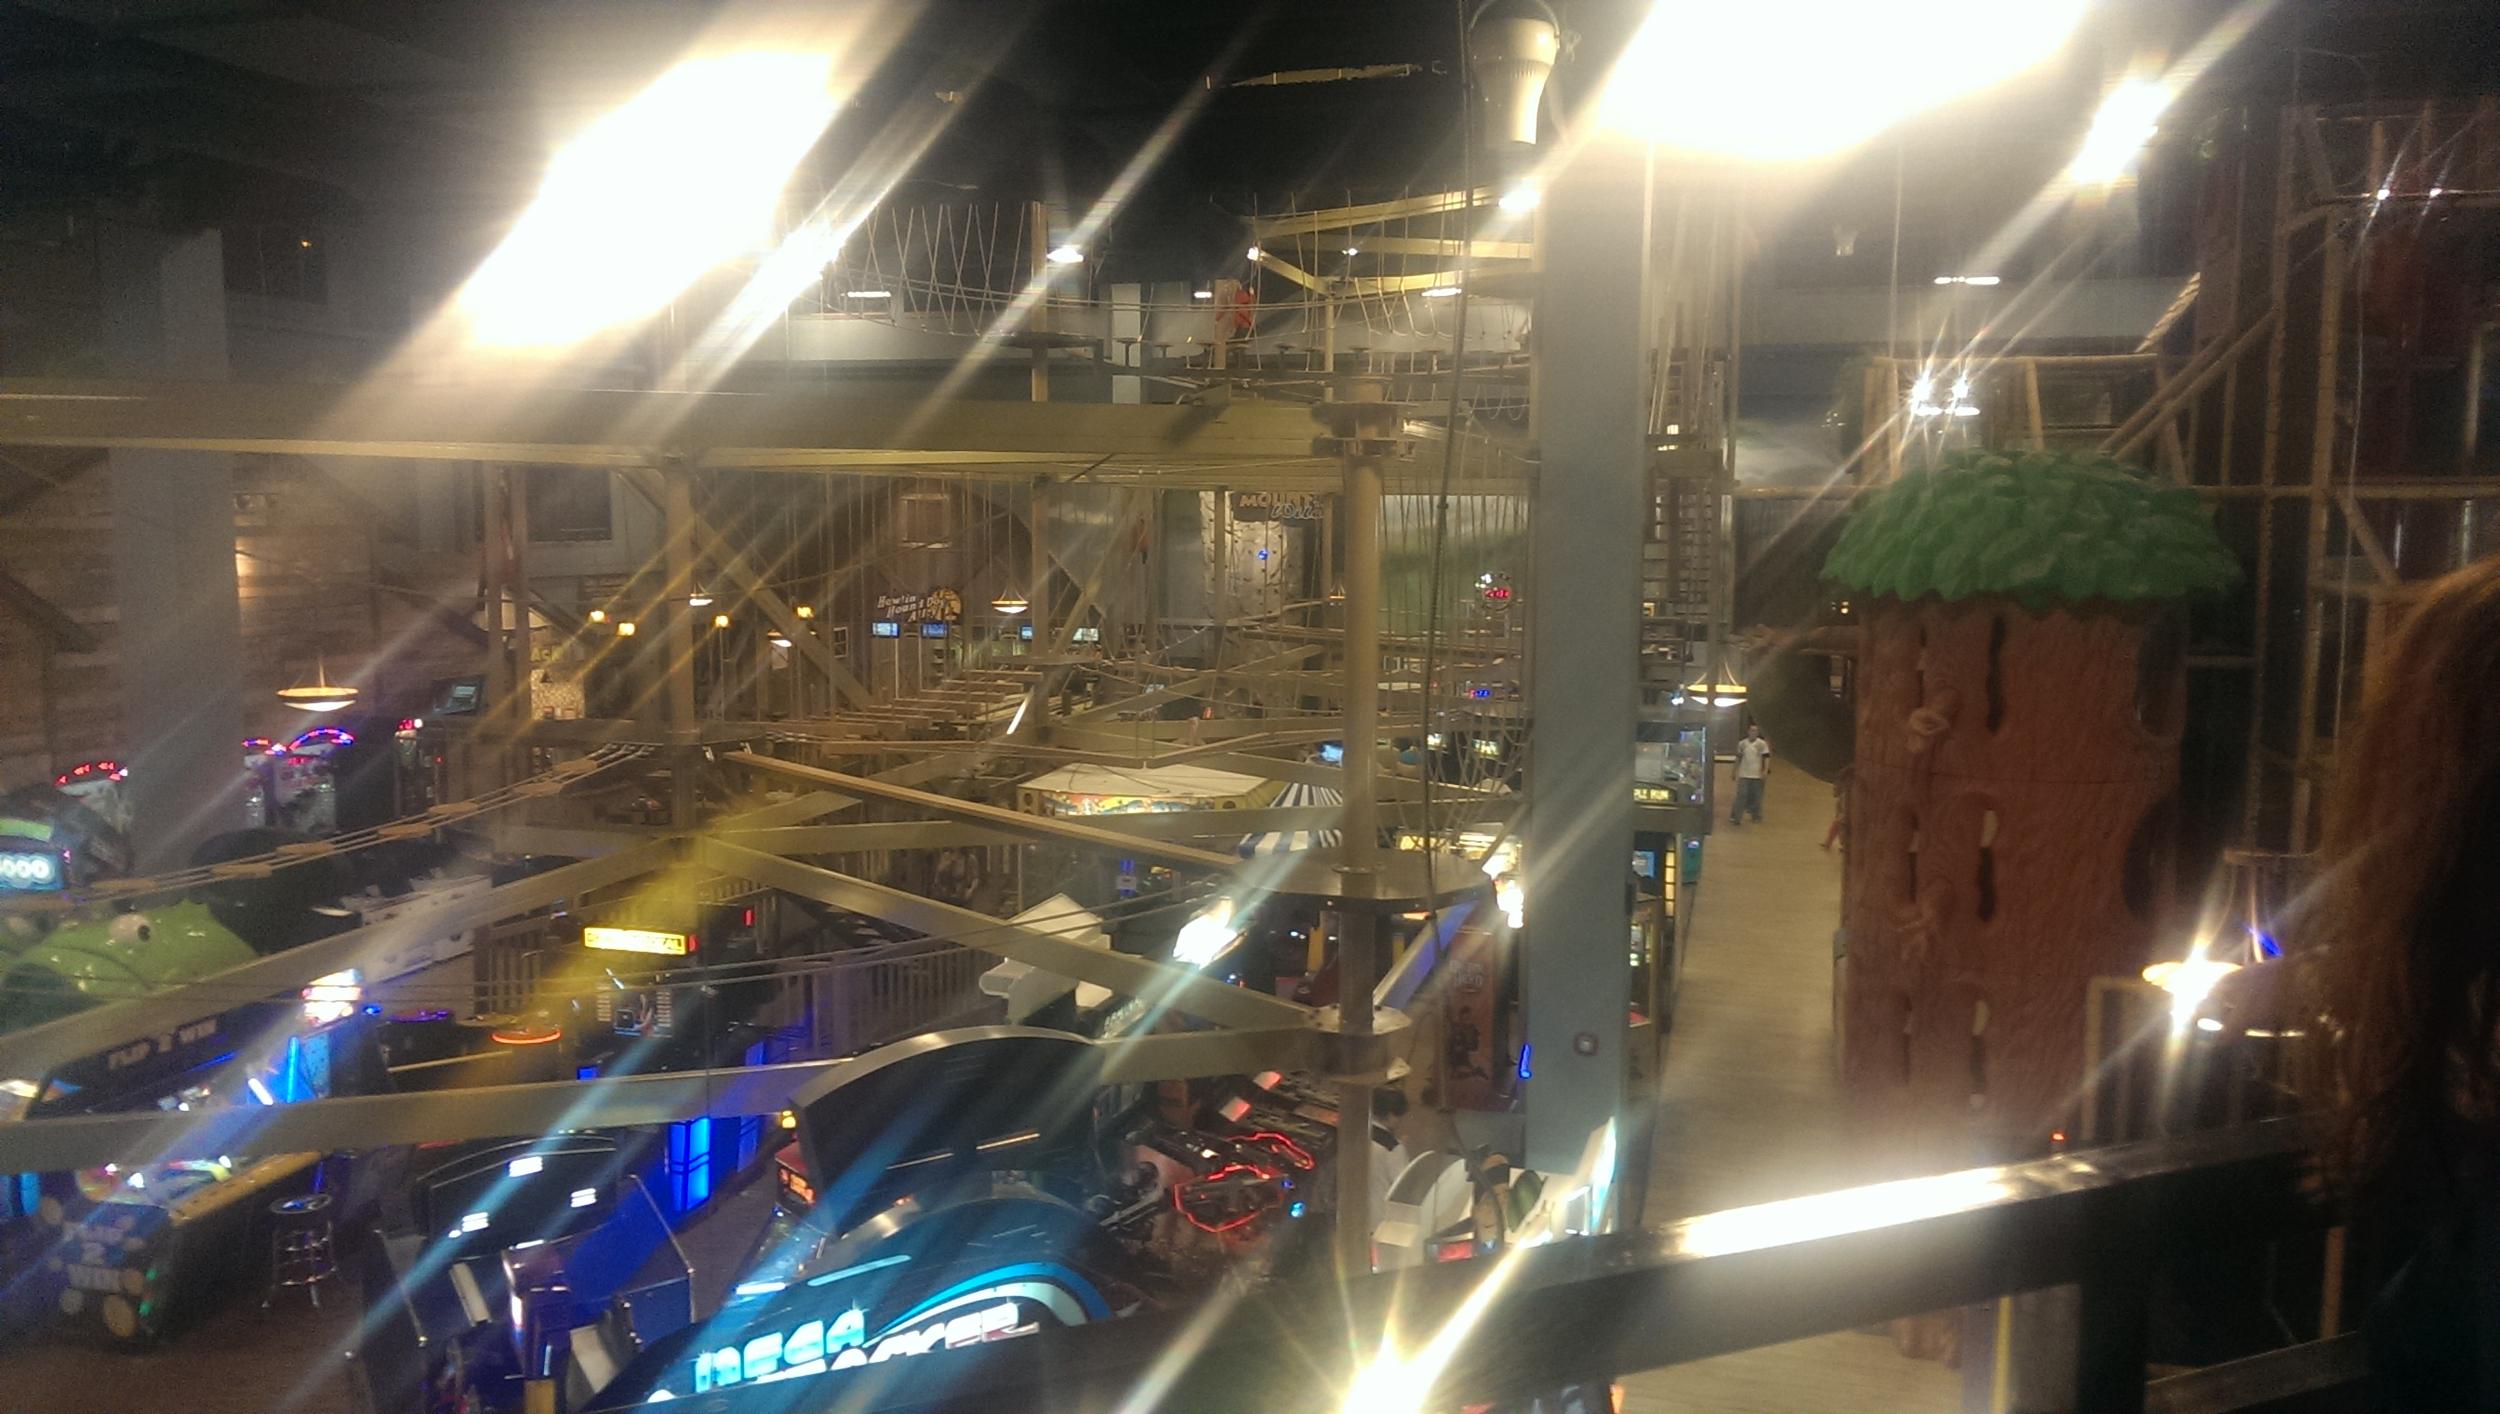 The indoor ropes course.